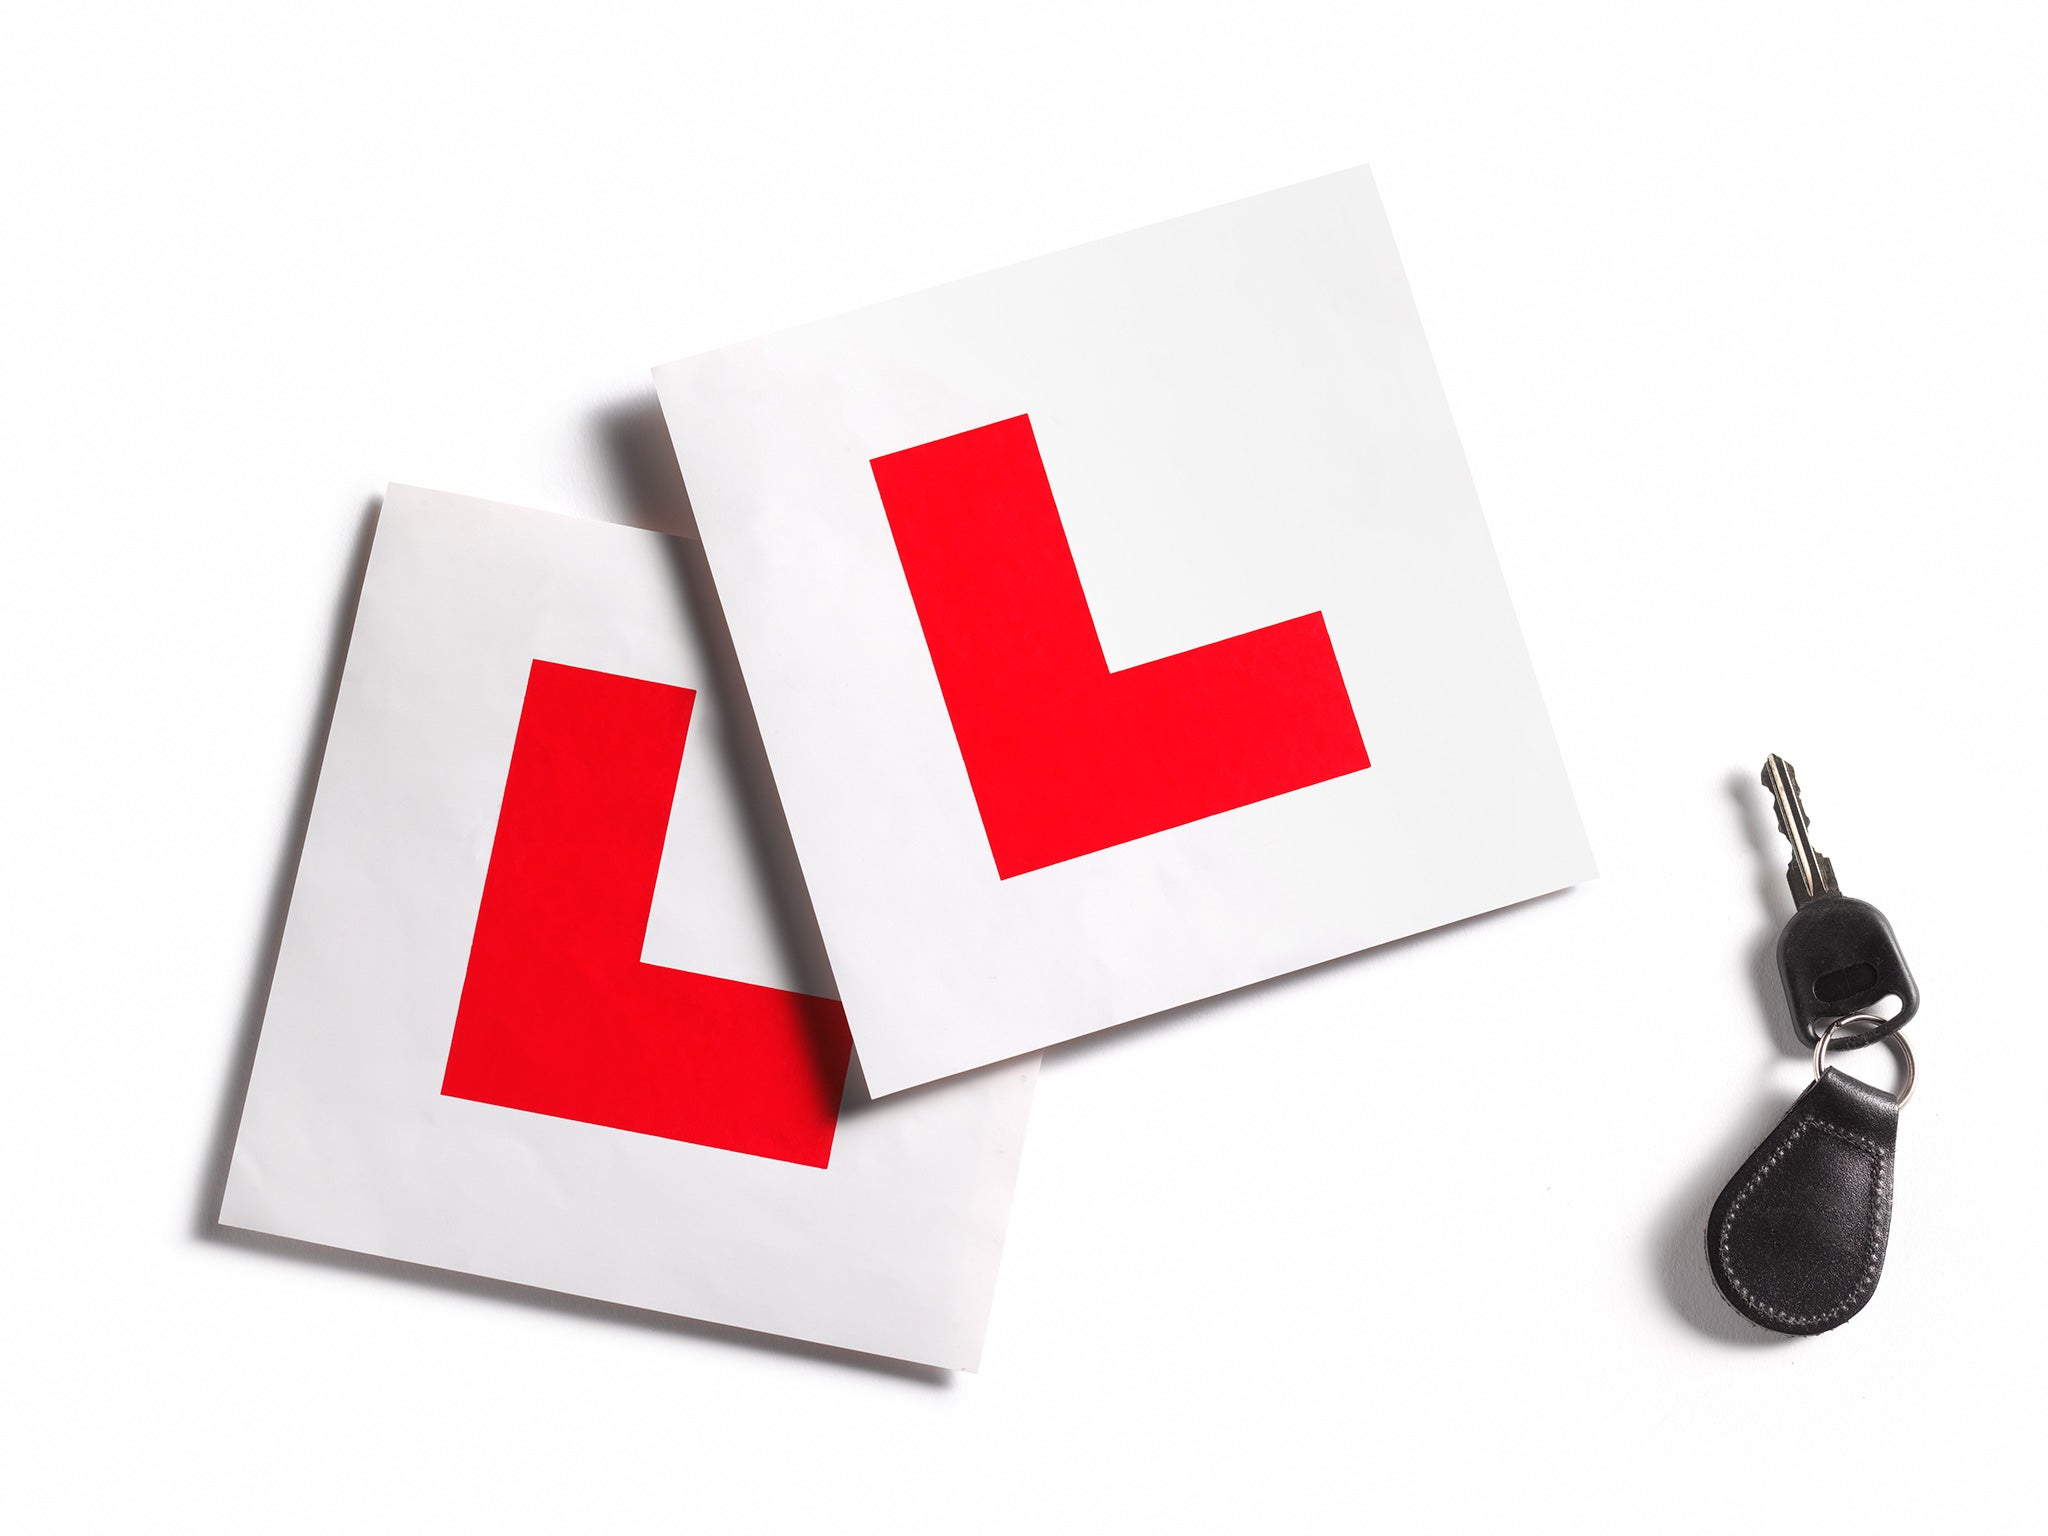 Driving test waiting times hit eight weeks last year